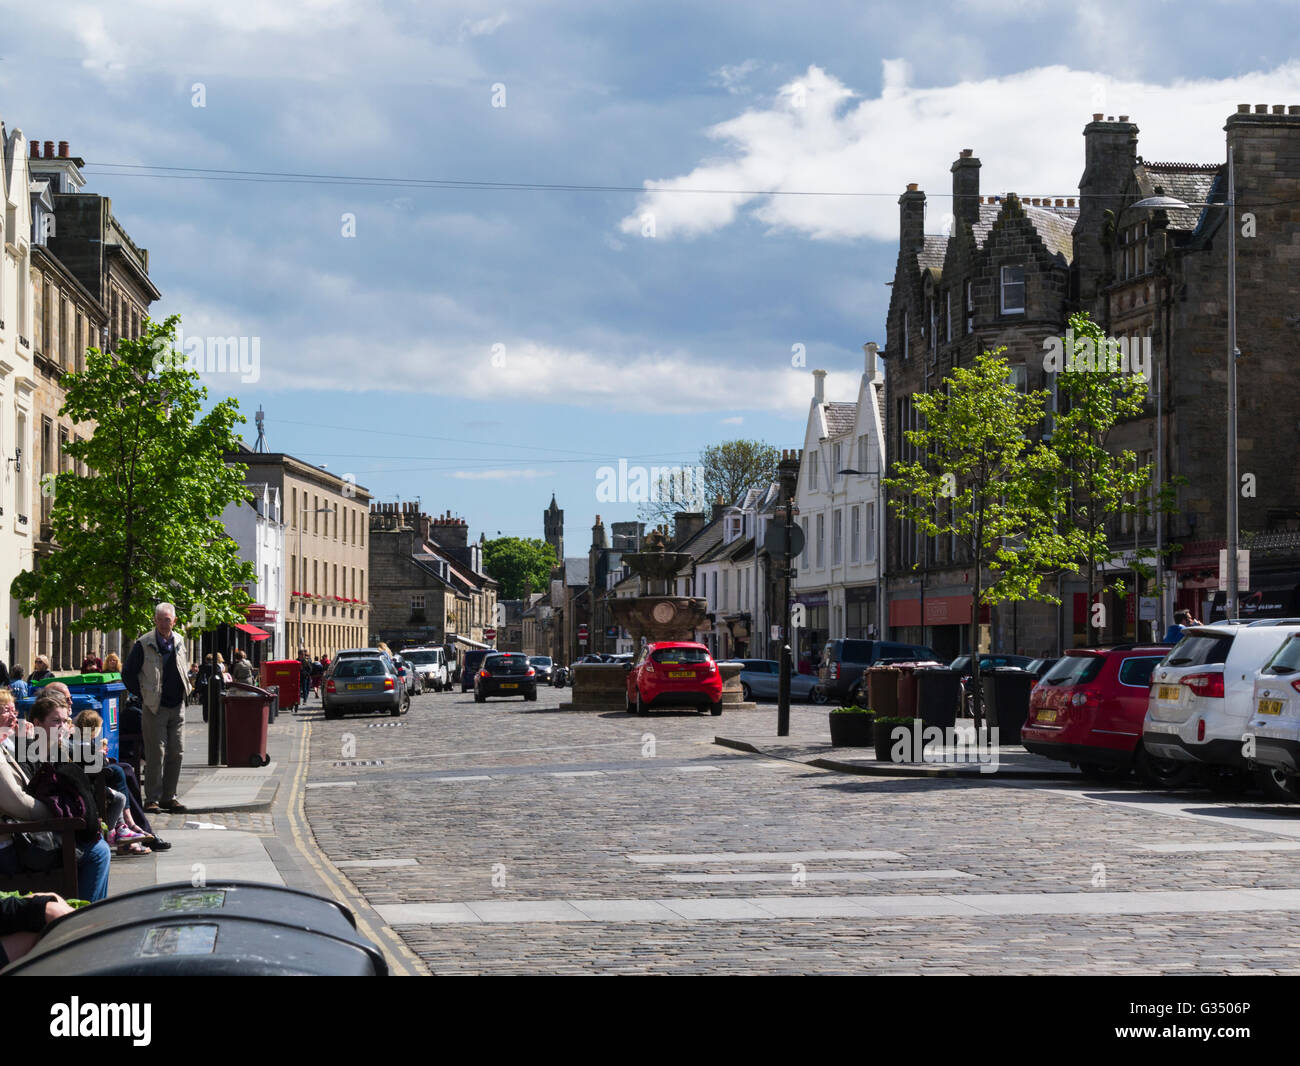 View along Market Street historic Royal Burgh St Andrews Fife Scotland cobbled street flanked by shops cafes restaurants pubs in historic buildings Stock Photo